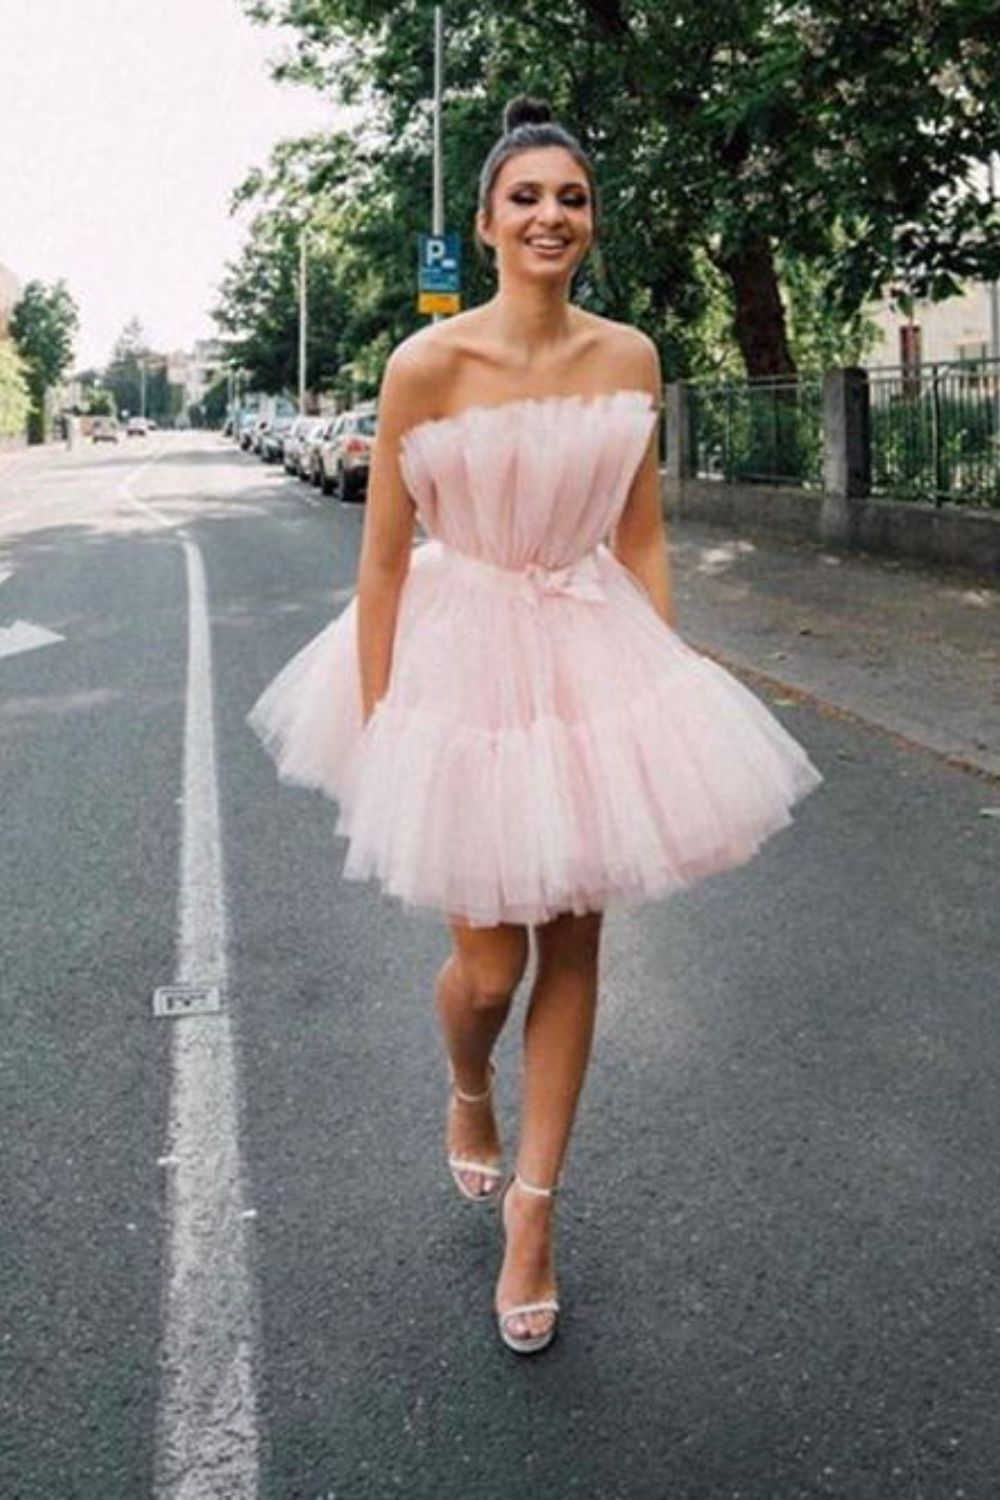 Dressime A Line Pink Tulle Above-Knee Homecoming Cocktail Dress With Bowknot